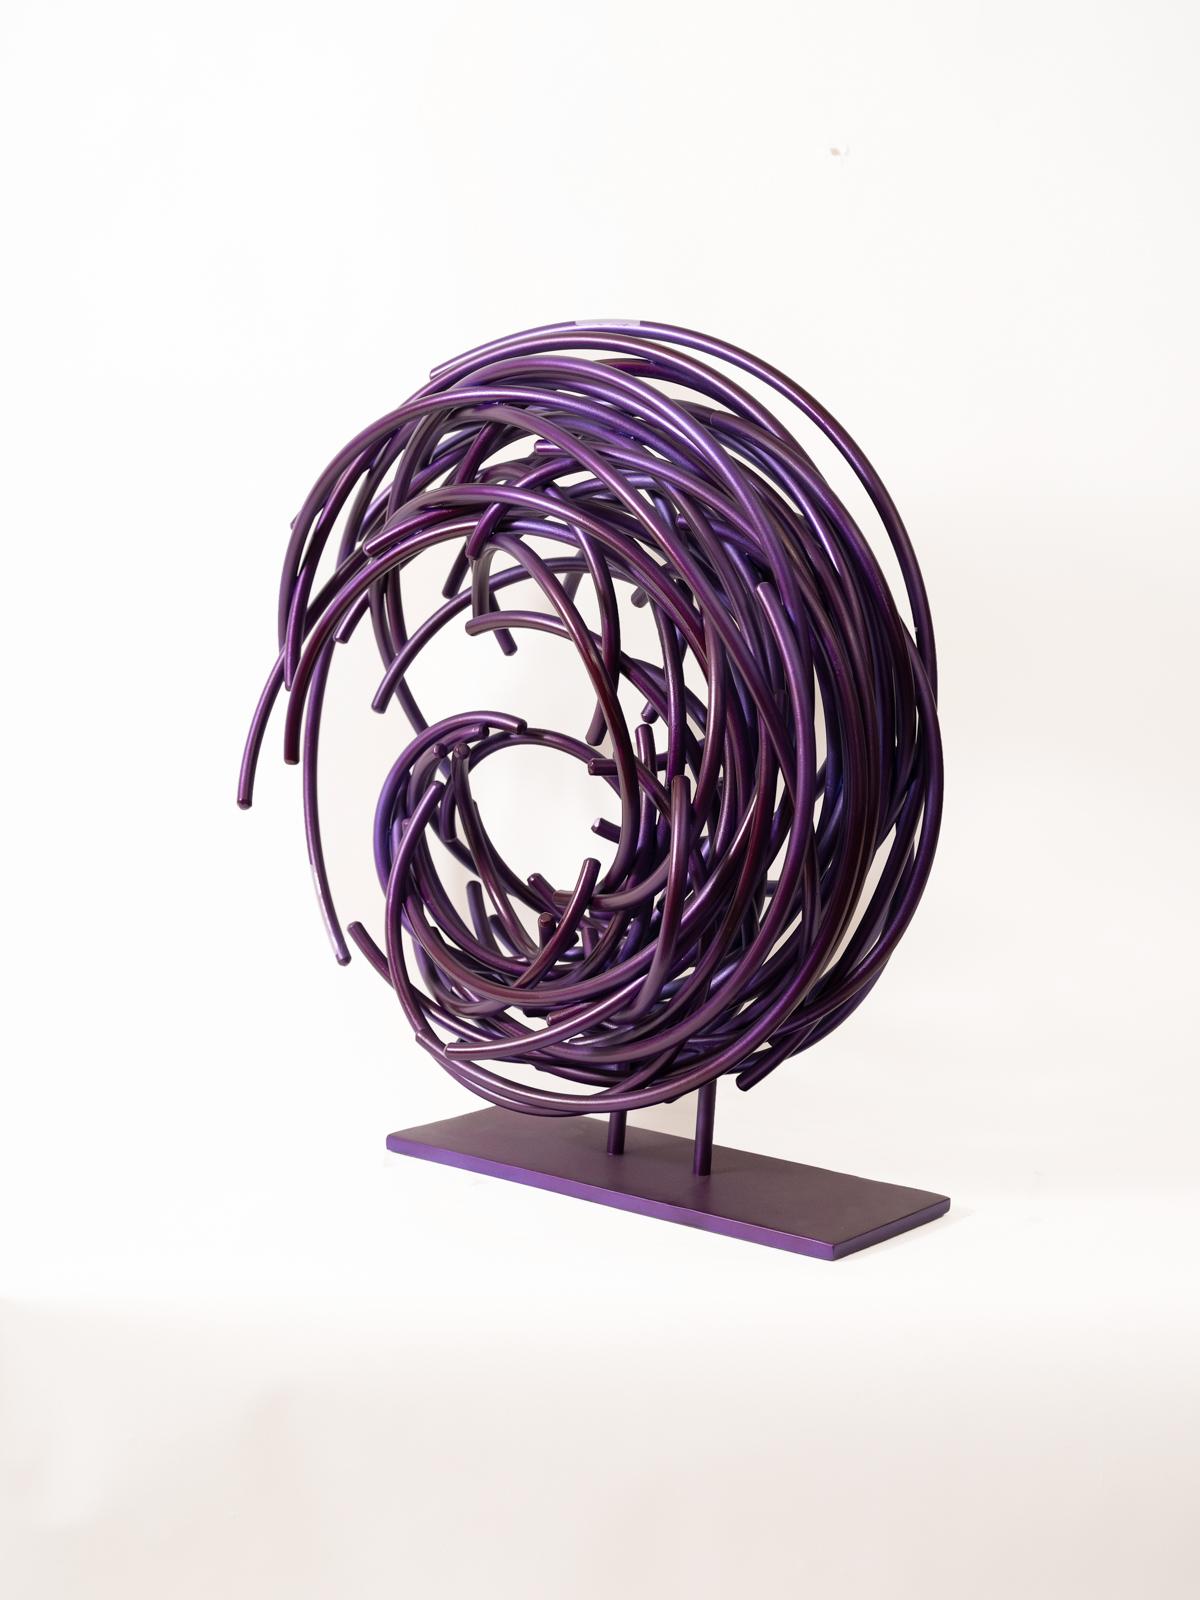 Maelstrom Series No 5 - layered, intersecting, forged aluminum sculpture For Sale 2